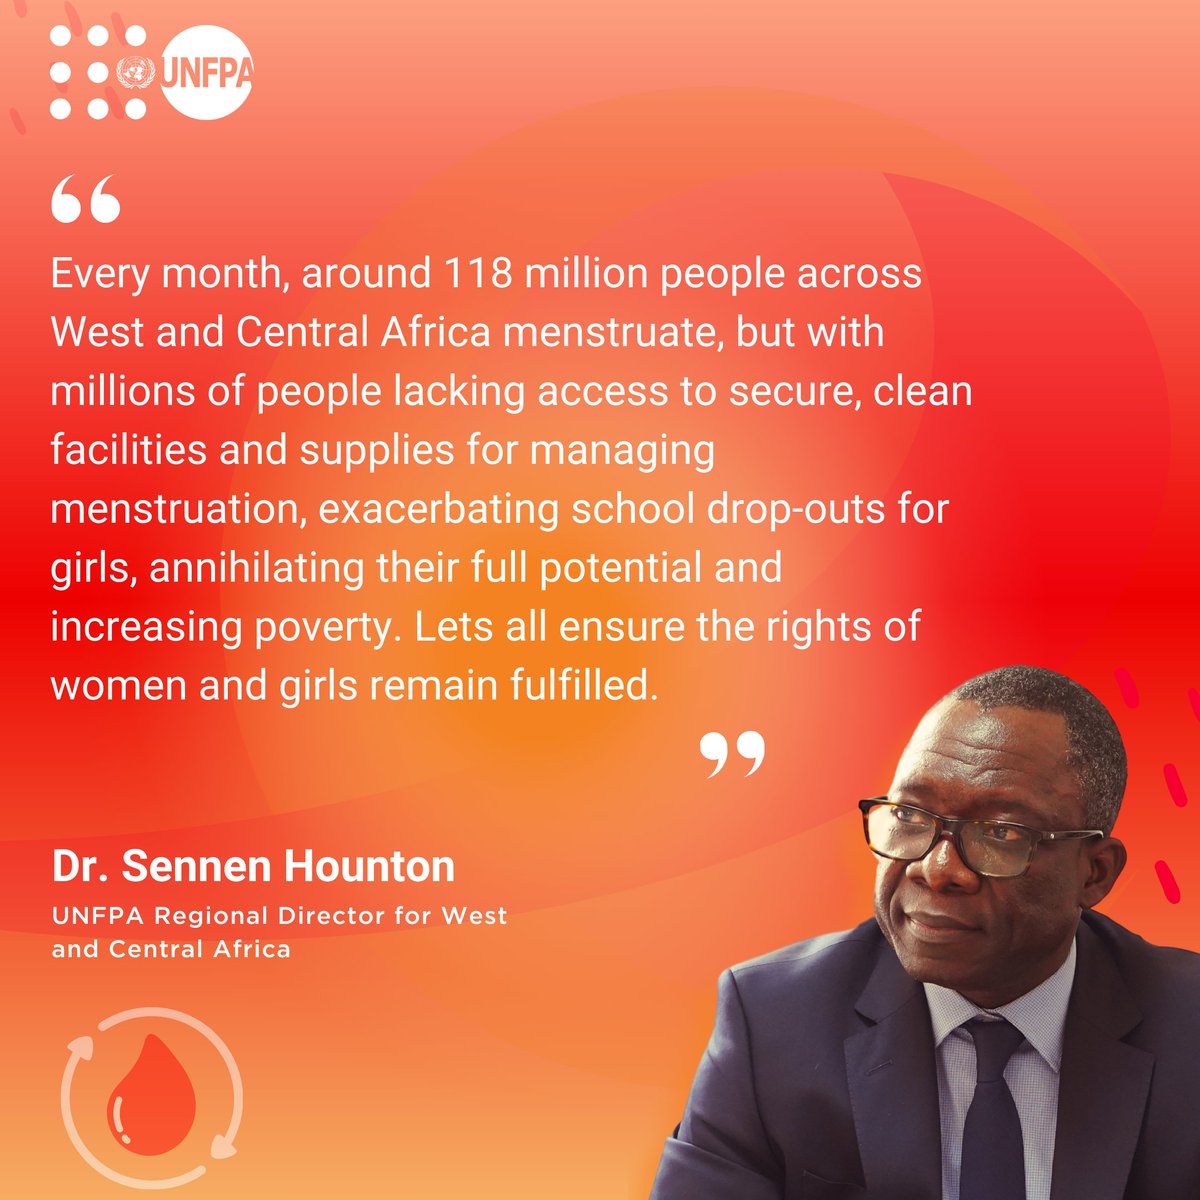 💮 💮 What if you got your period, but had no menstrual products? ↪️ Everyone should manage their menstrual health safely and with dignity.😓 See the message of our regional Director on this #MenstrualHygieneDay. #PeriodFriendlyWorld